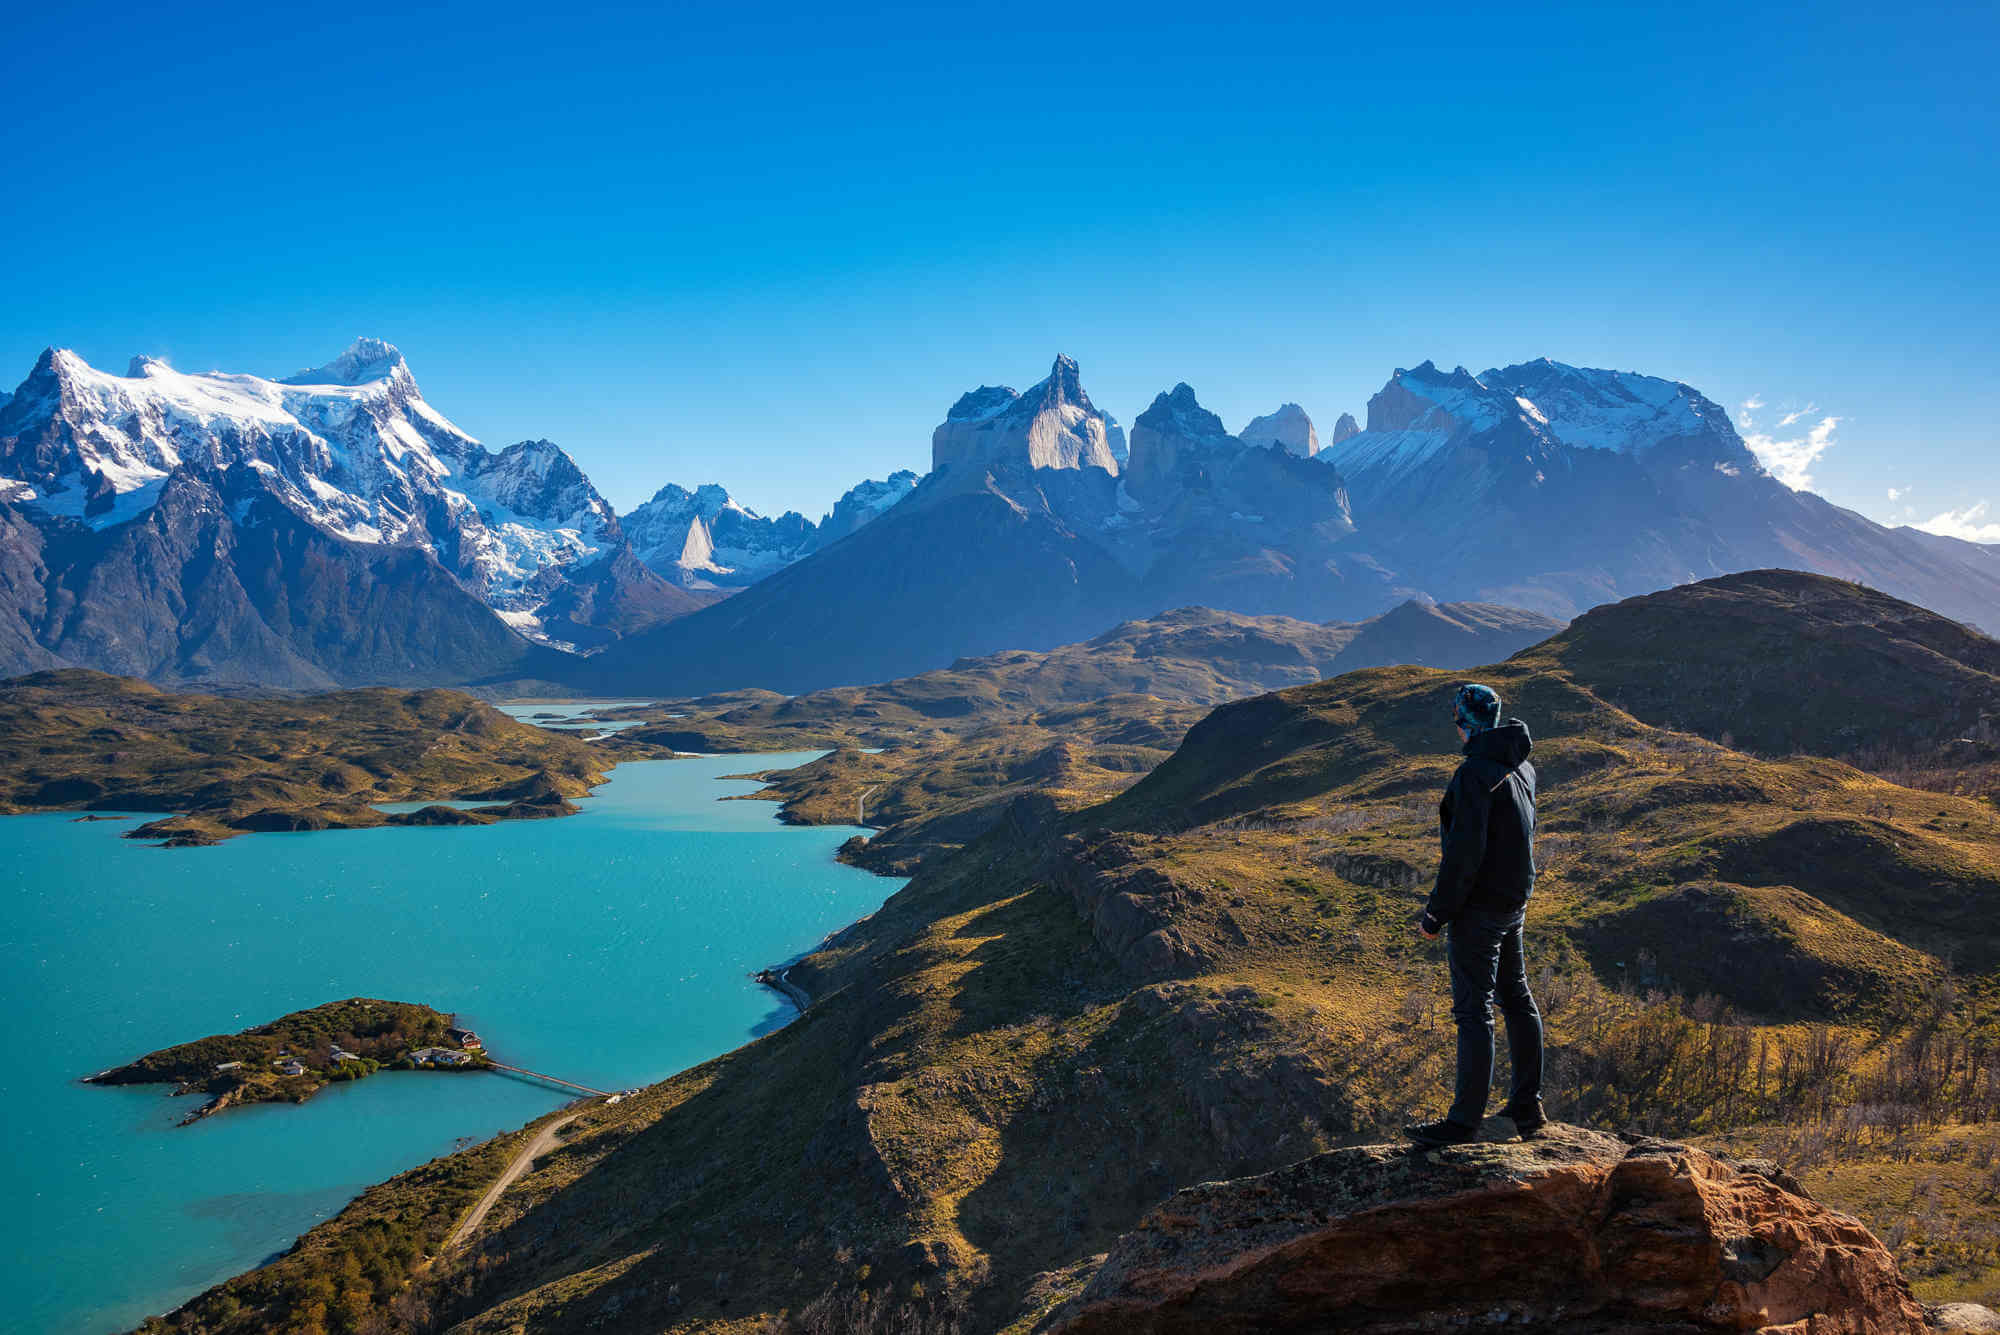 The 15 Best Day Hikes in Torres del Paine According to an Expert [2020]